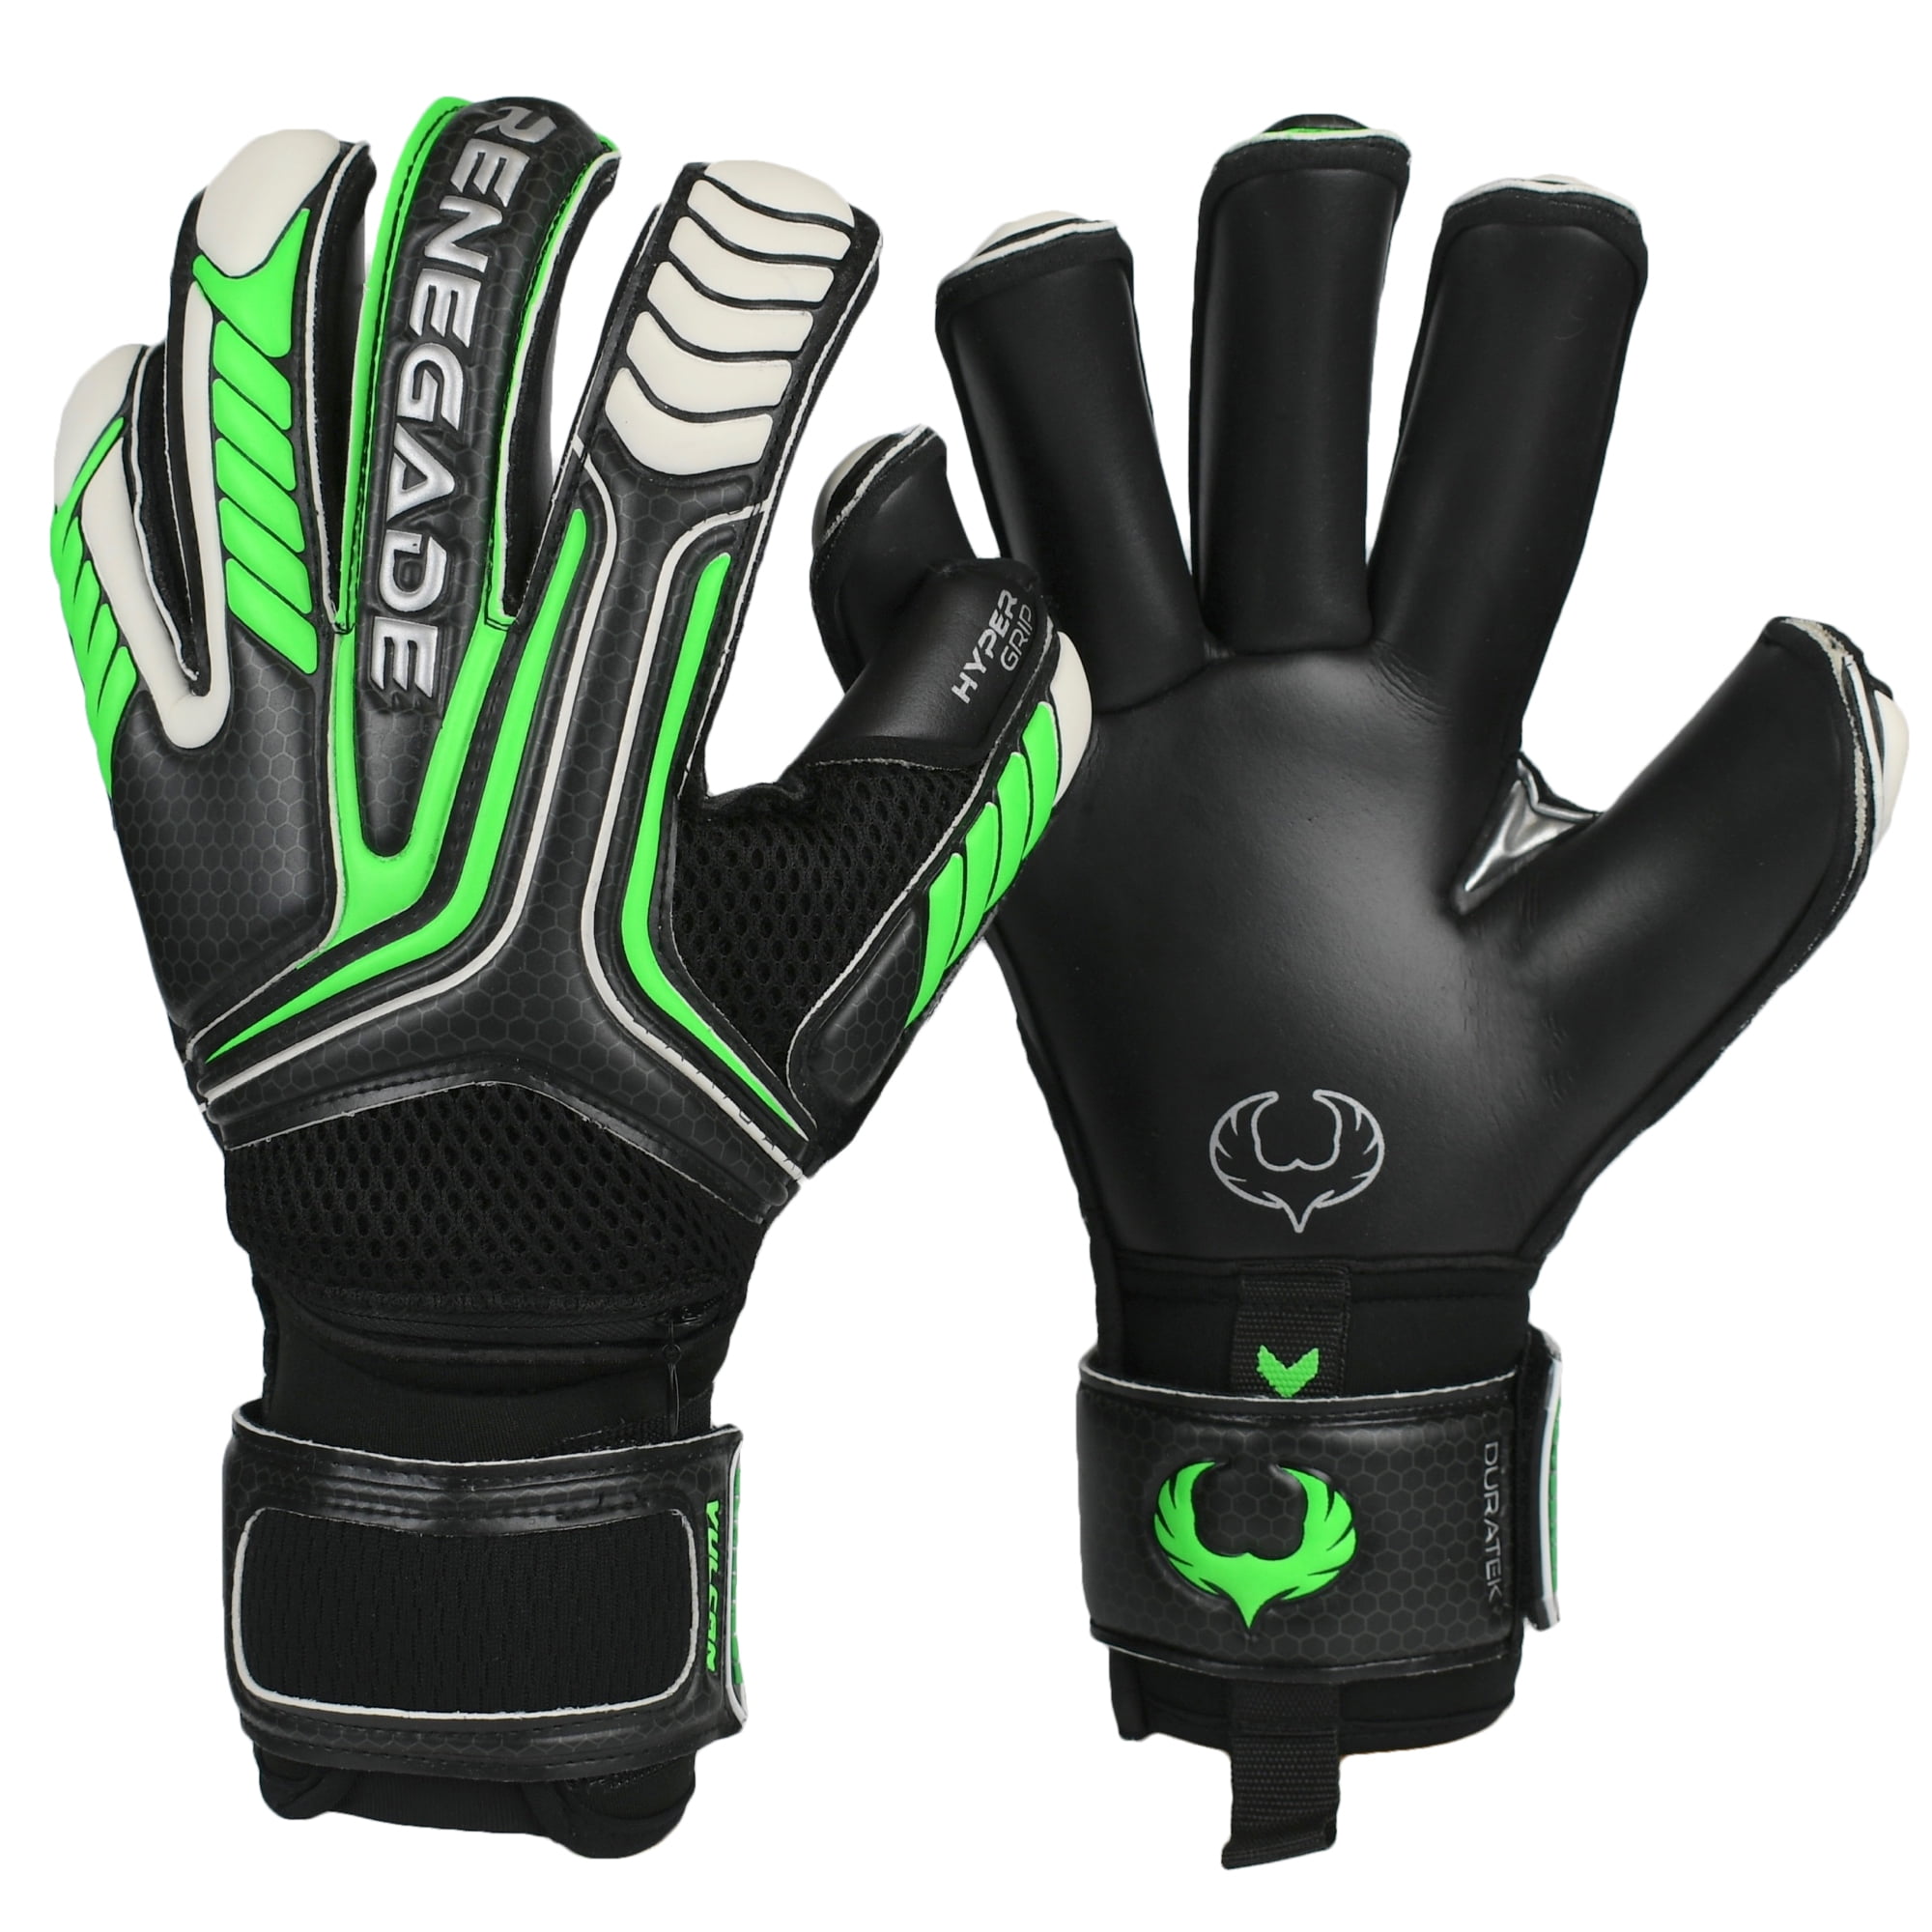 Splay Club Finger Save Football Goalkeeper Gloves Size11,Latex Palm Construction 